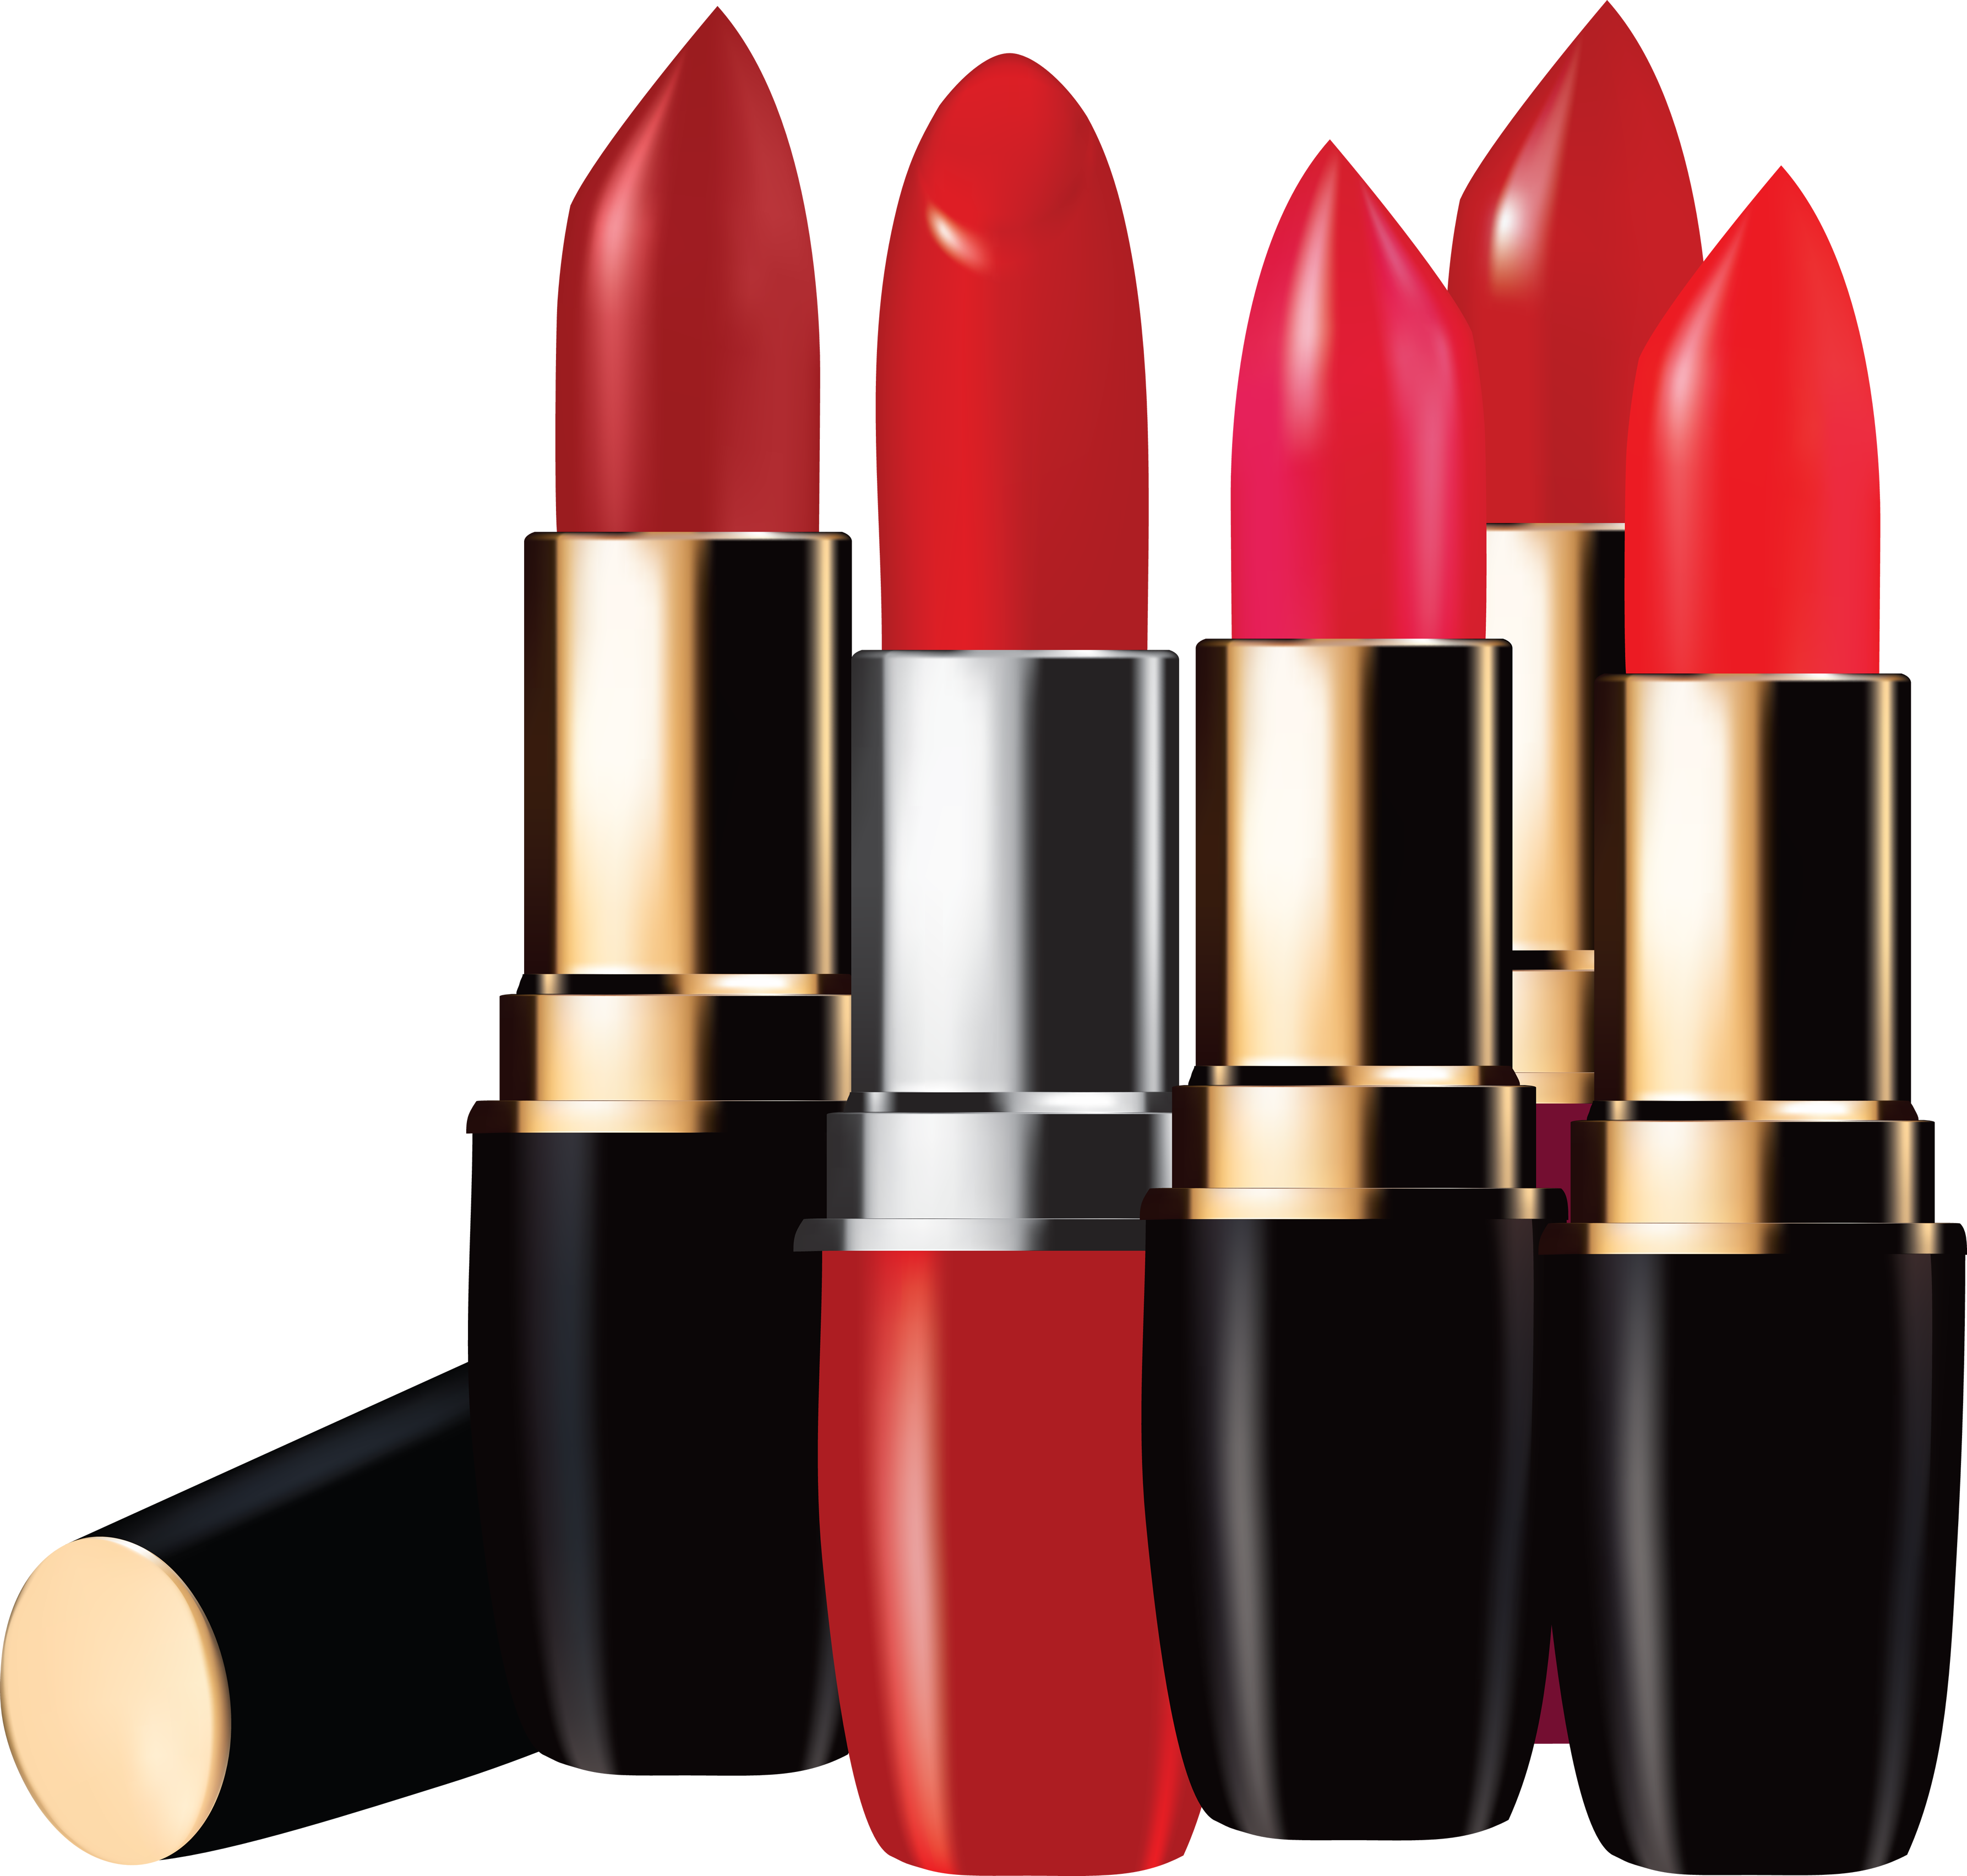 Without Brand Lipstick PNG Image